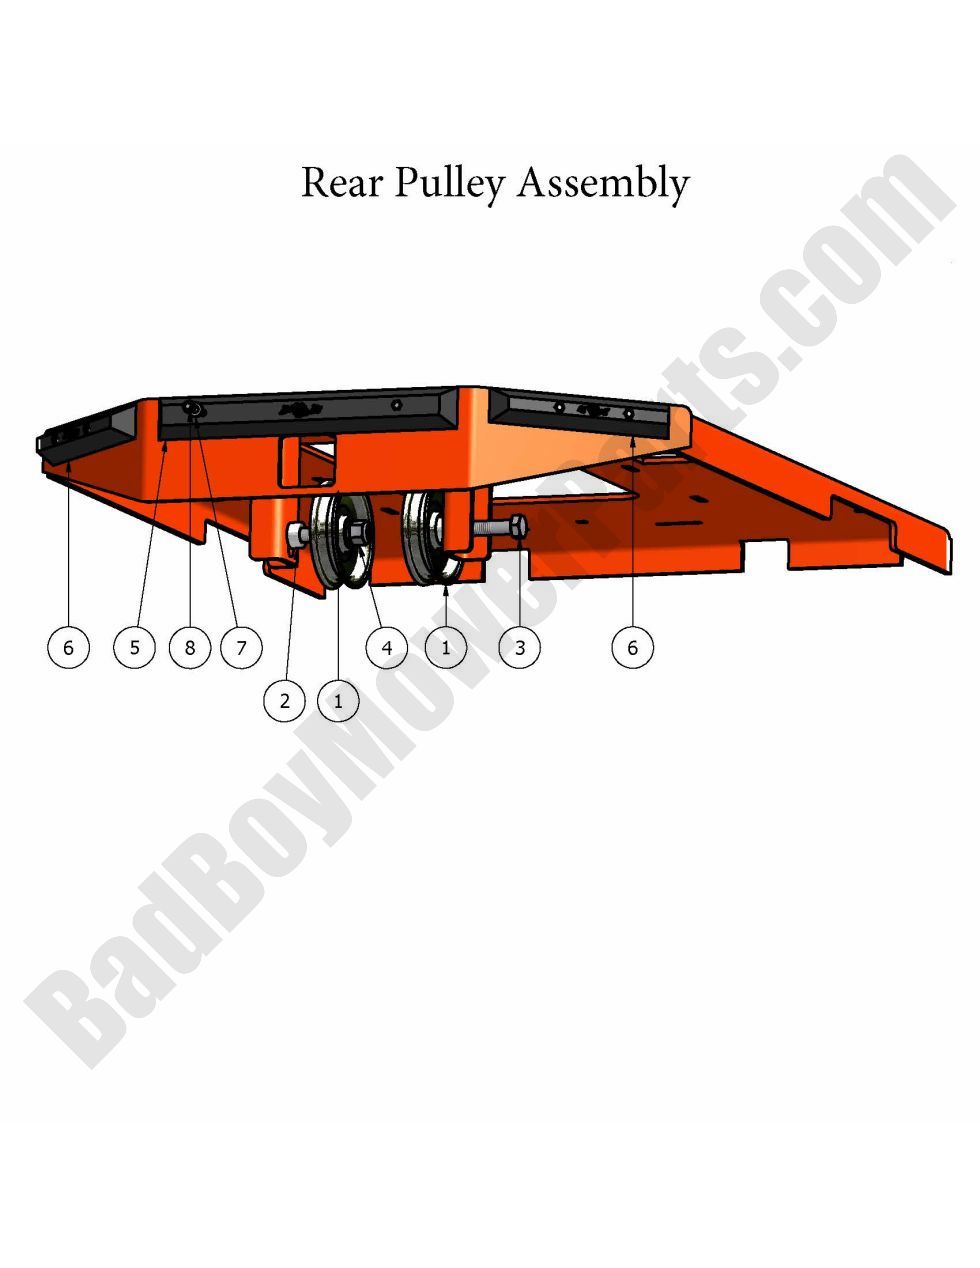 2009 AOS Rear Pulley Assembly